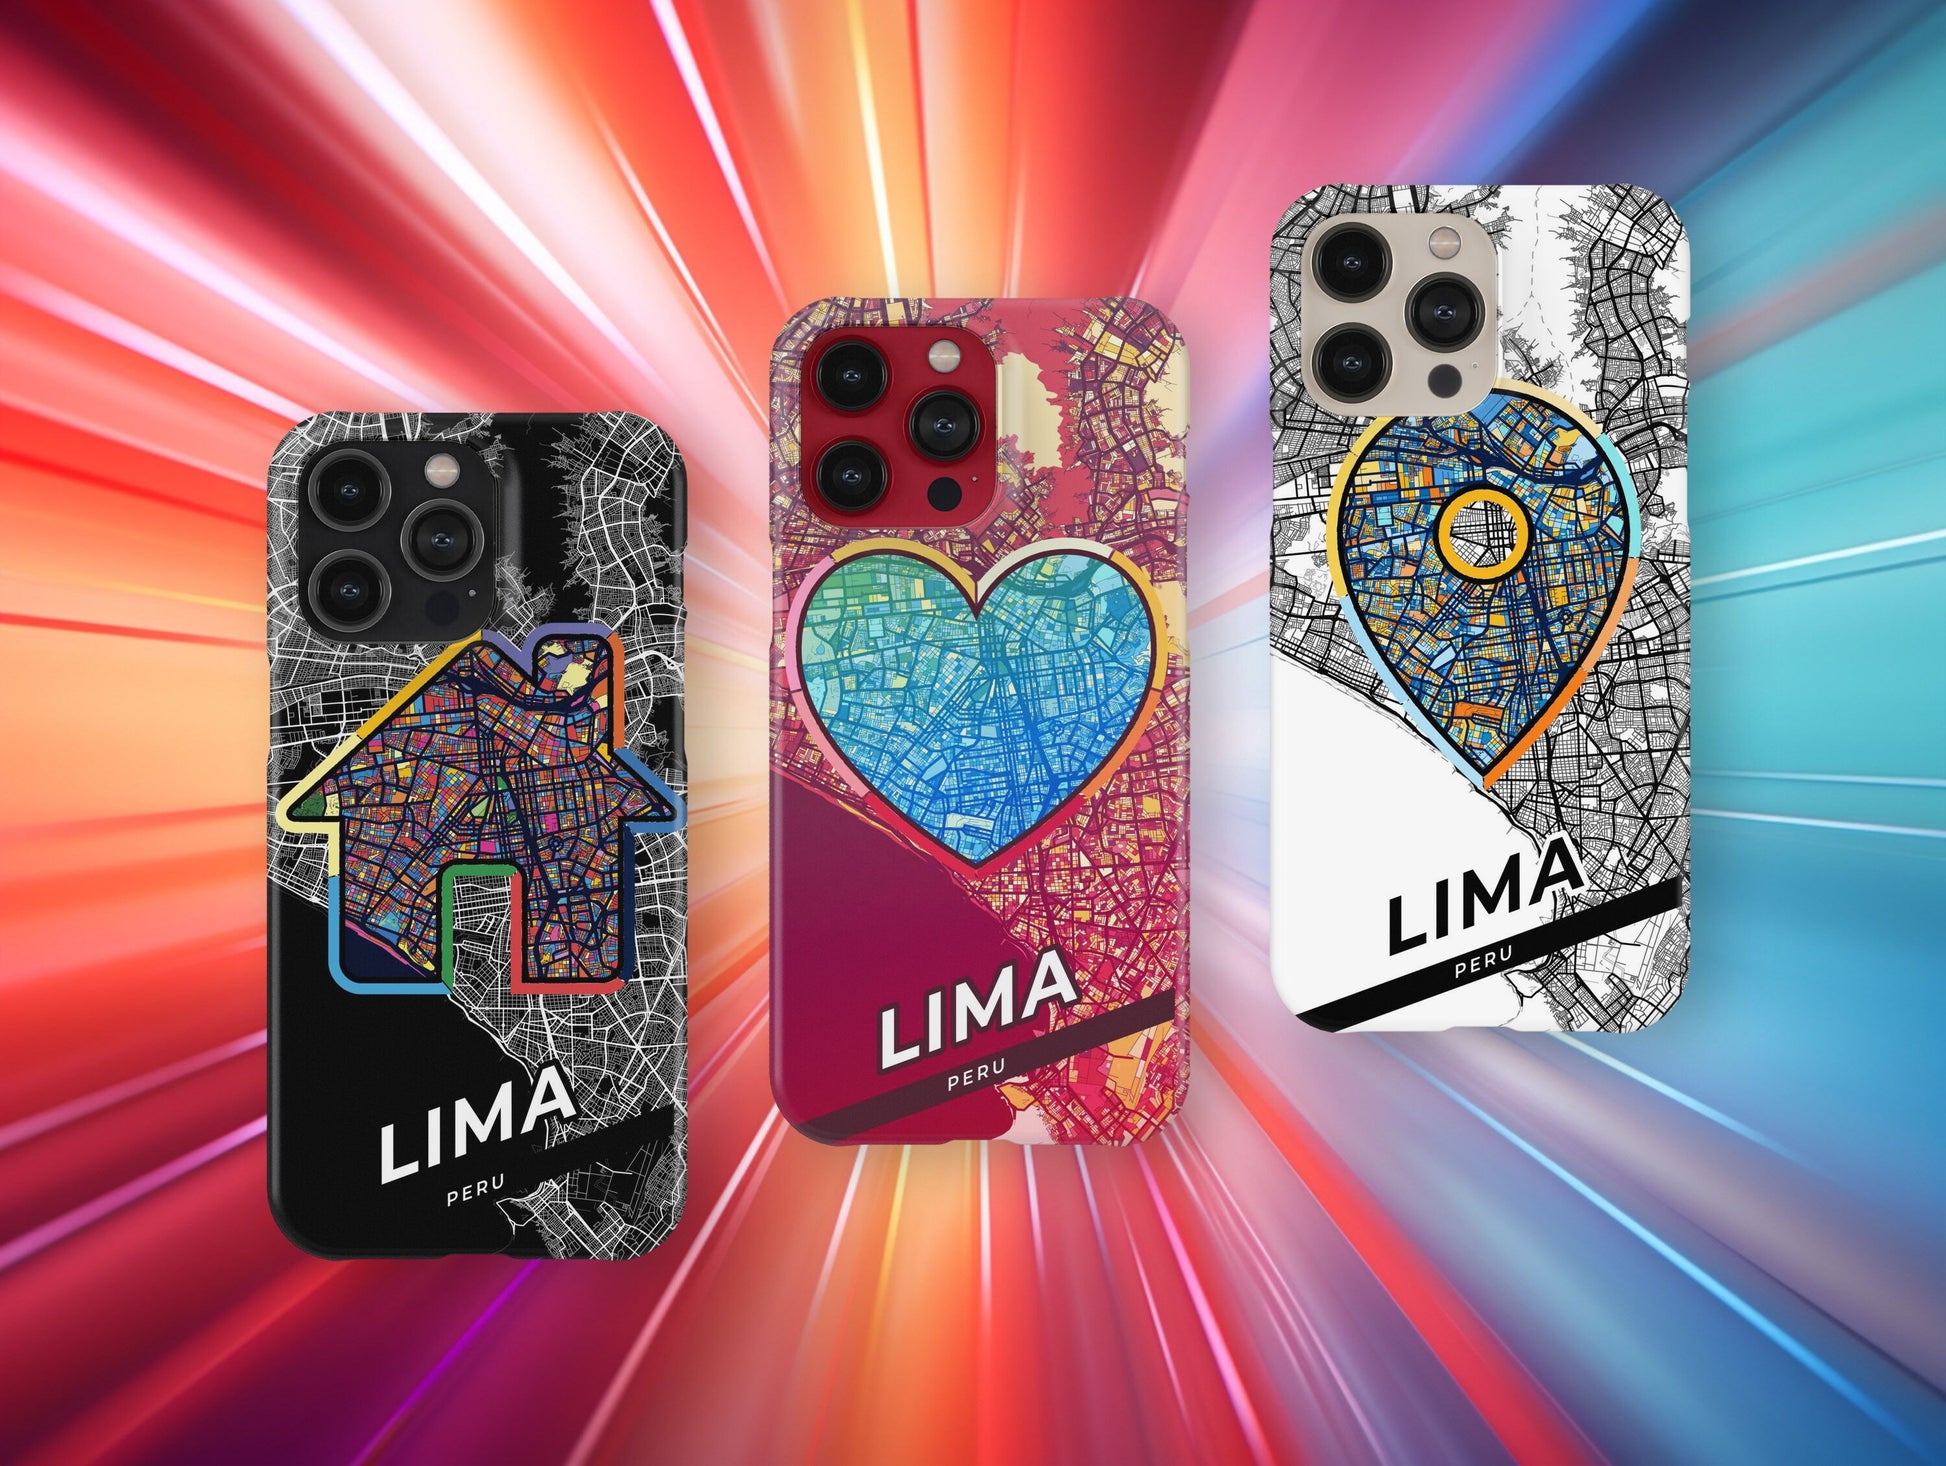 Lima Peru slim phone case with colorful icon. Birthday, wedding or housewarming gift. Couple match cases.